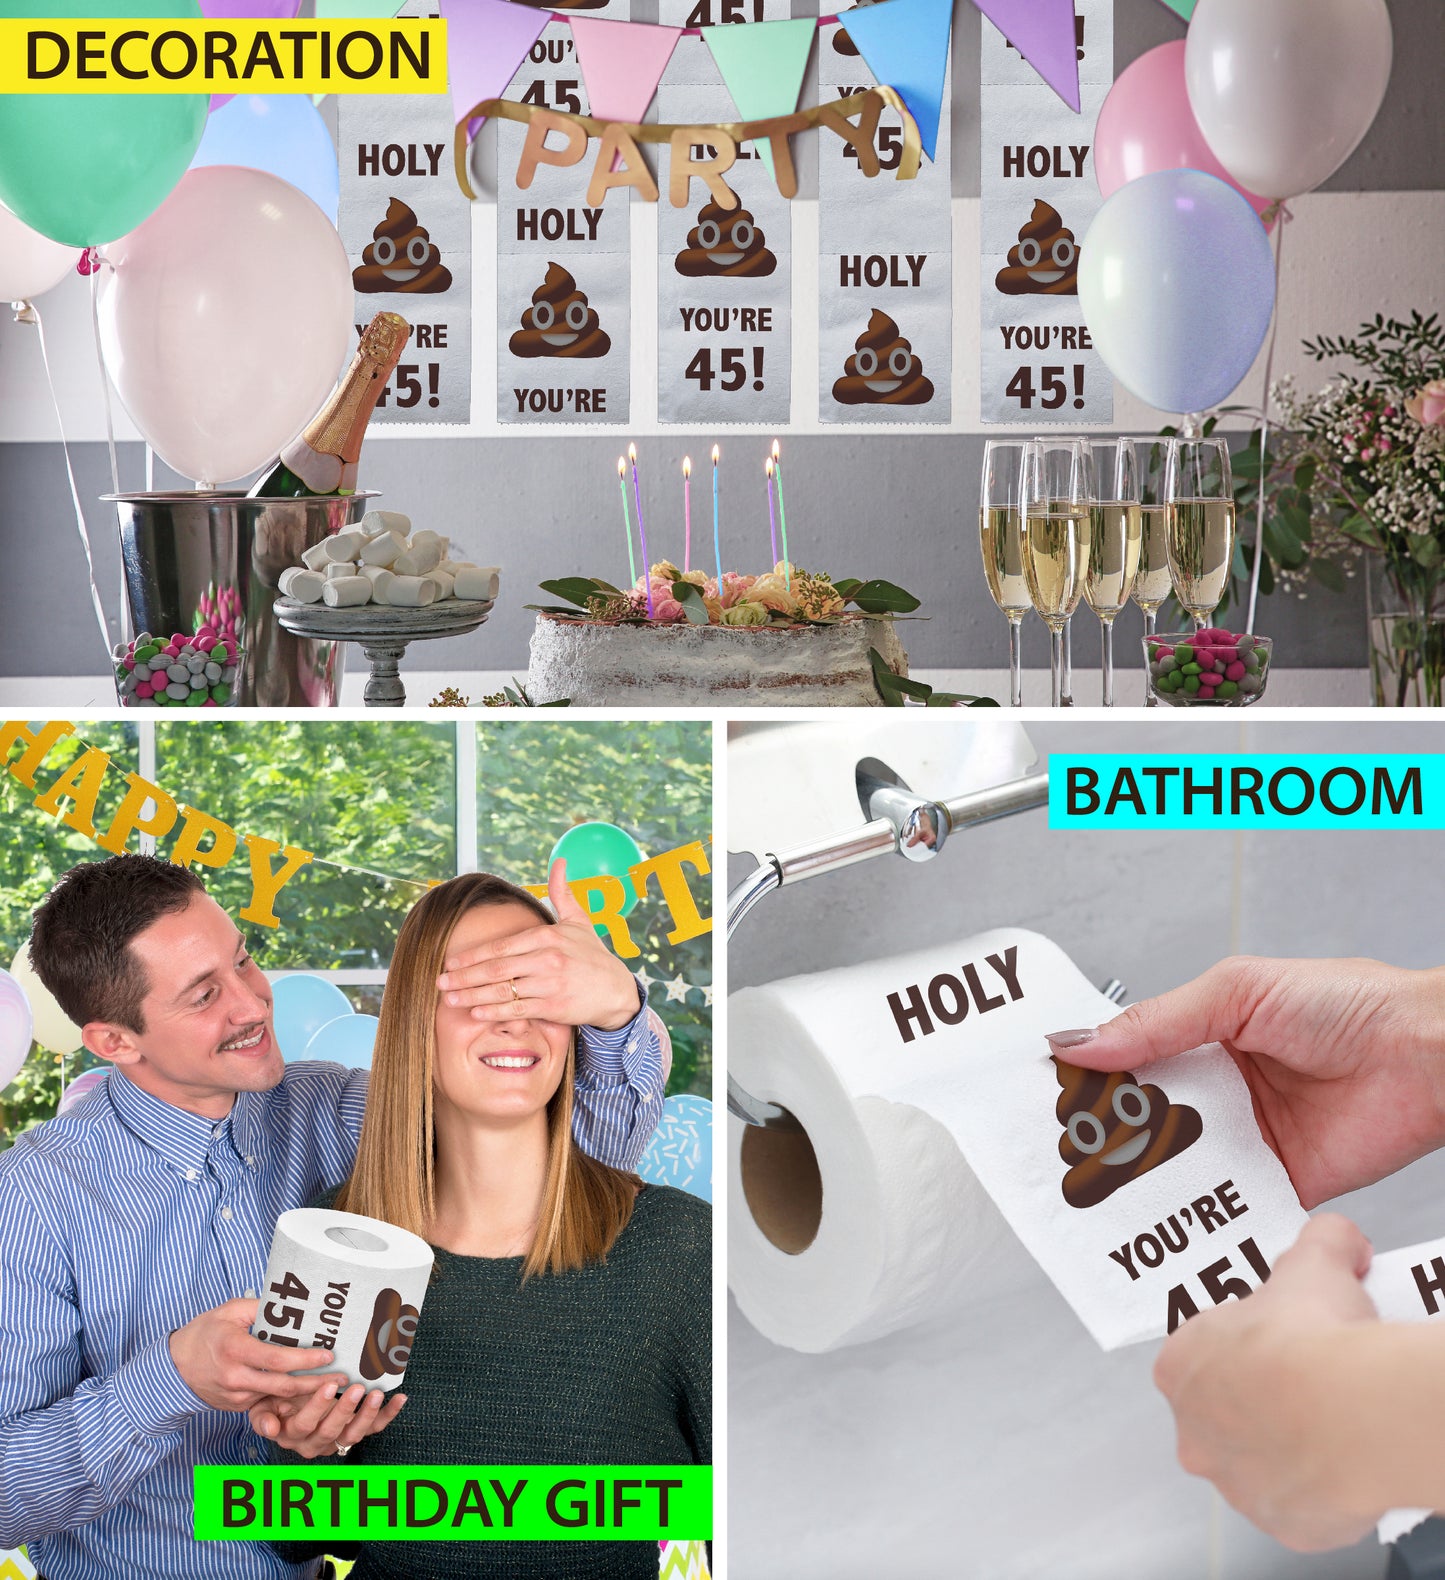 Printed TP Holy Poop You're 45 Funny Toilet Paper Roll Birthday Party Gag Gift